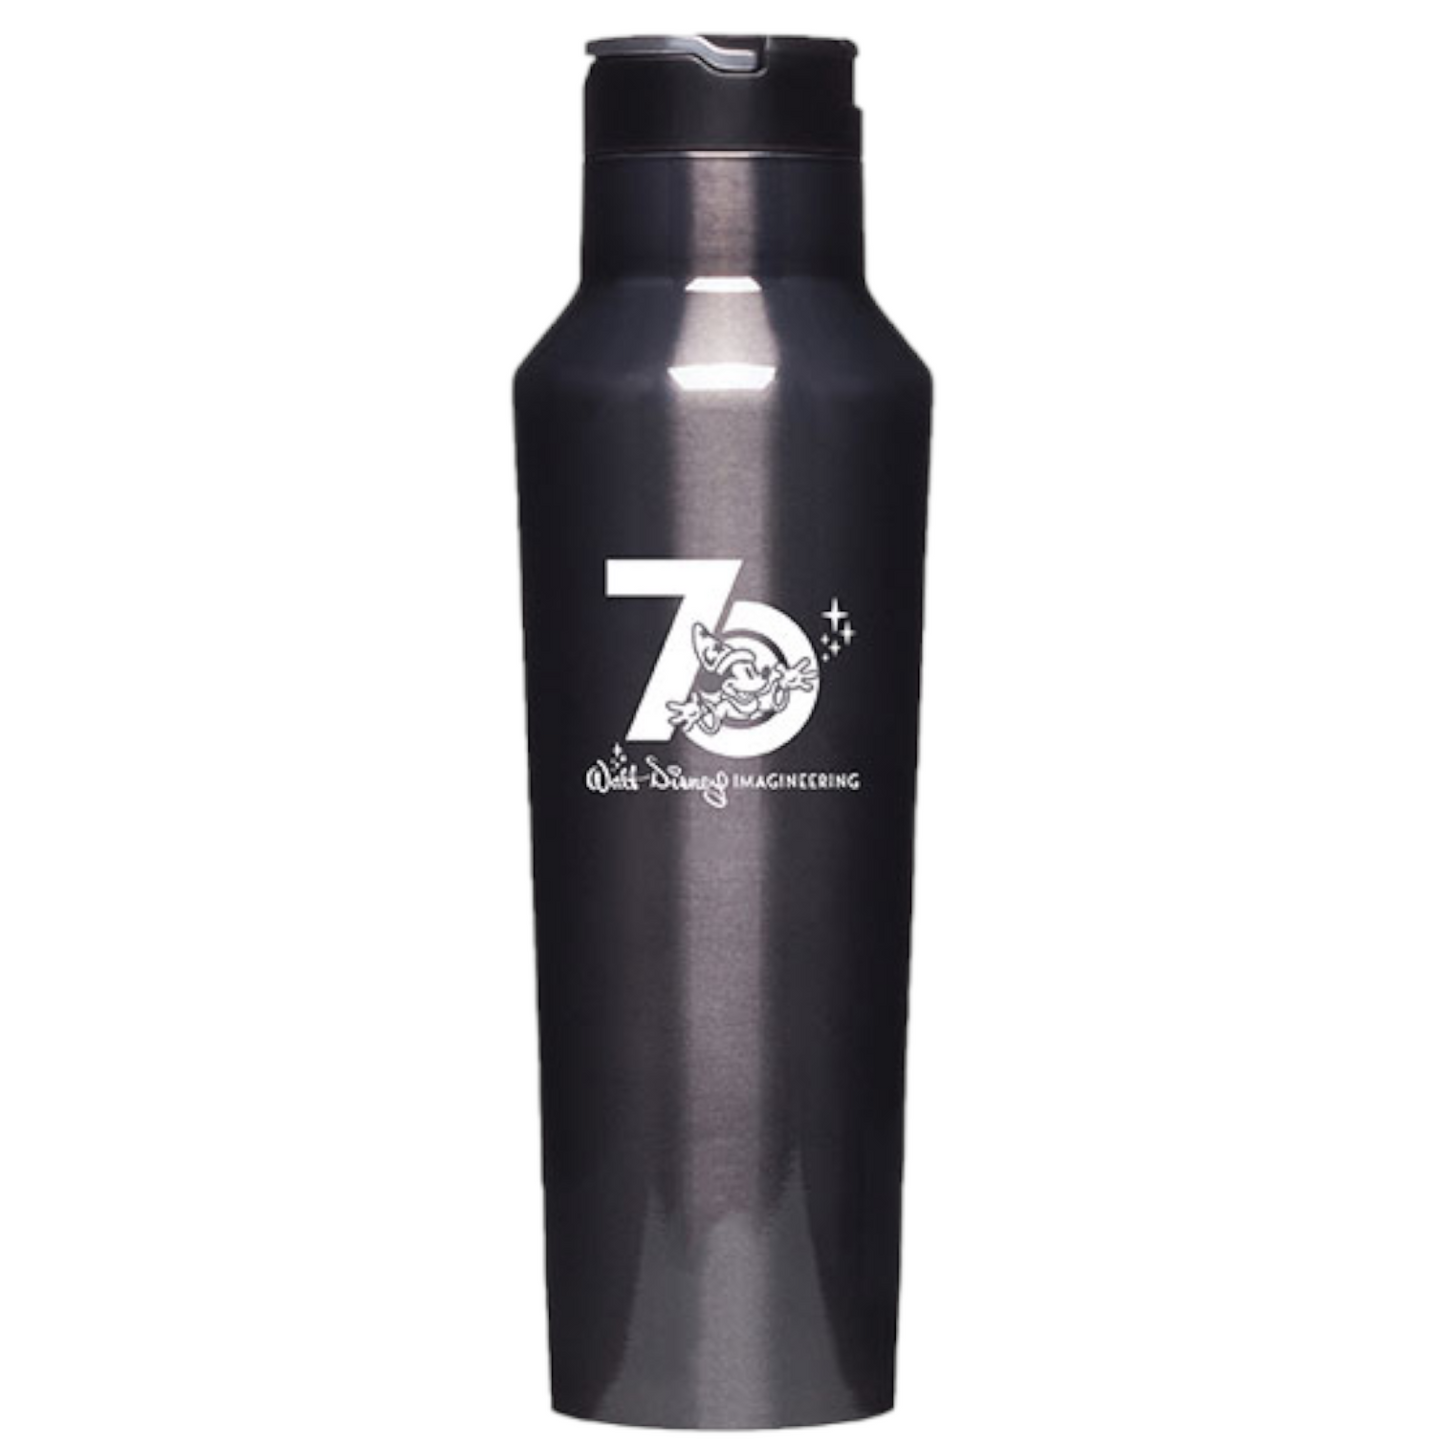 Walt Disney Imagineering 70th Anniversary Stainless Steel Sport Canteen by Corkcicle